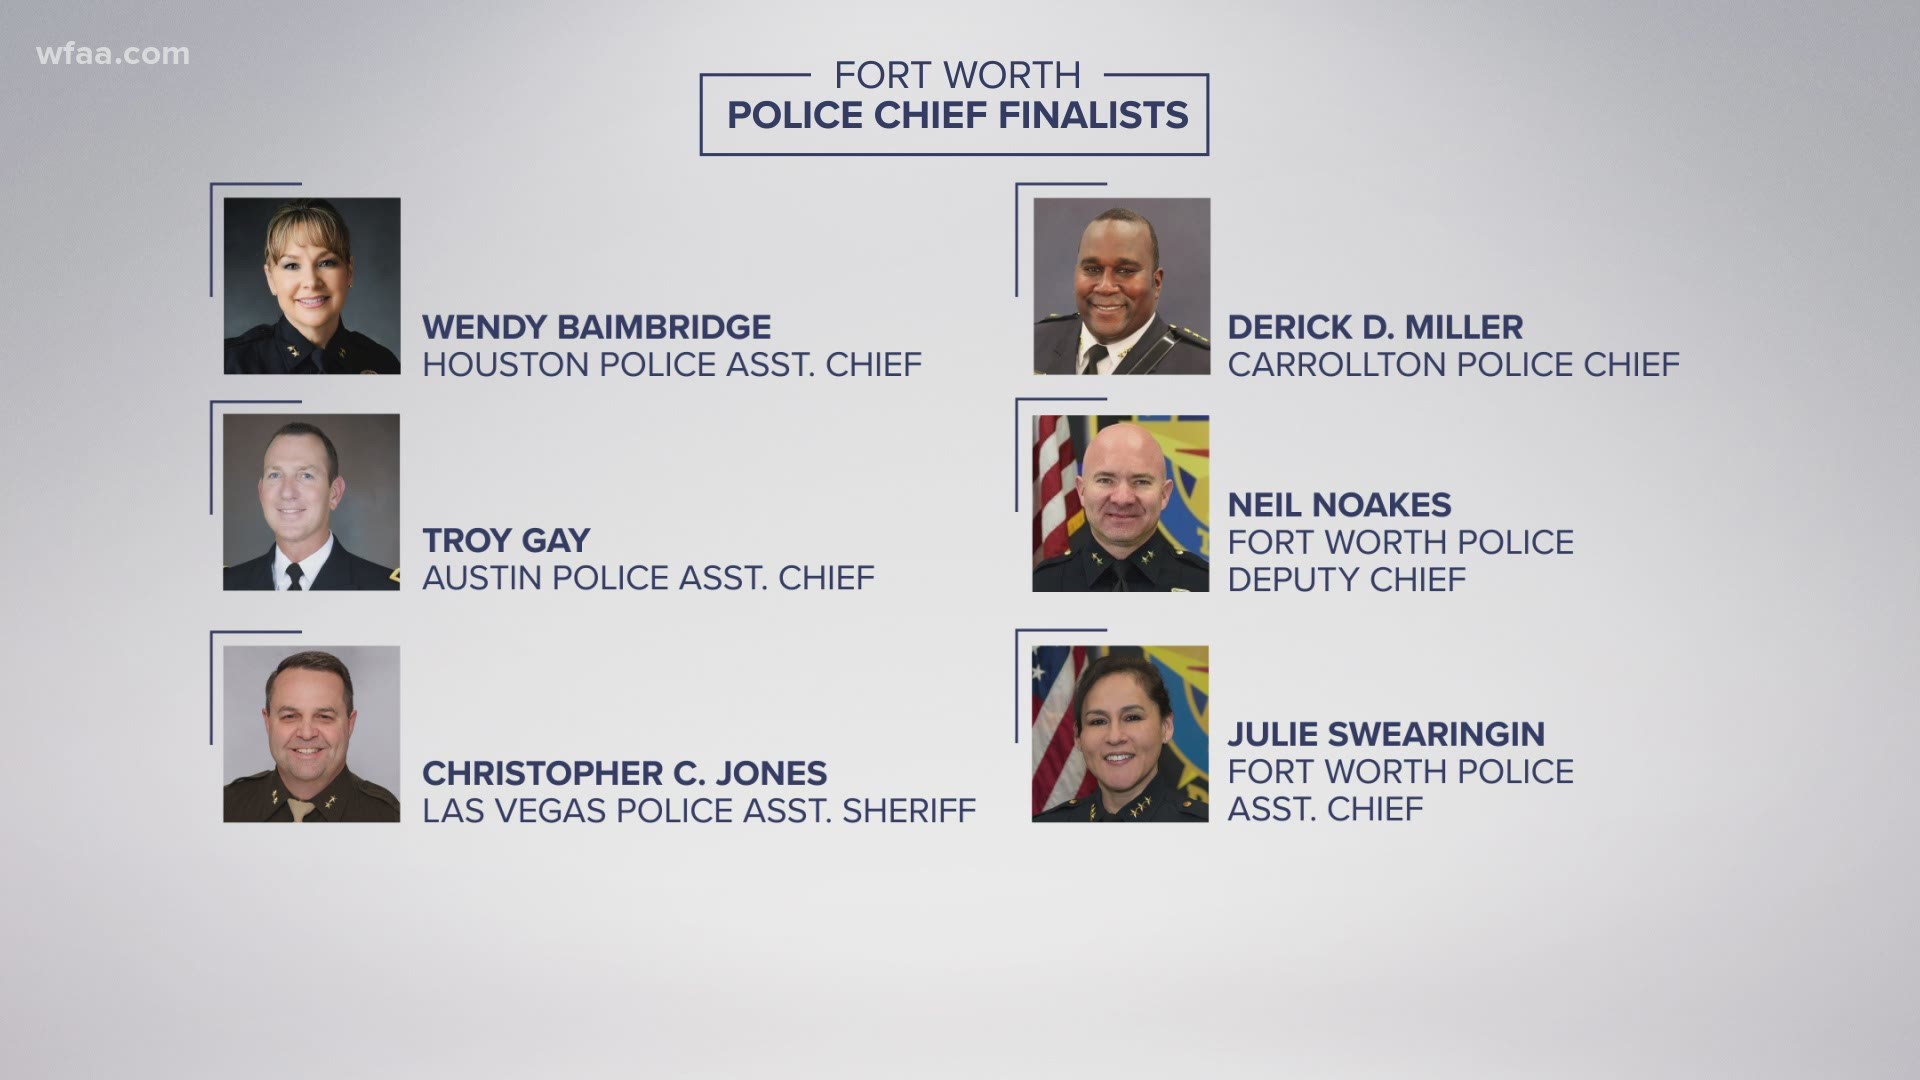 Five police executives within Texas, including two within Fort Worth Police Department, are vying for Chief Ed Kraus' job.